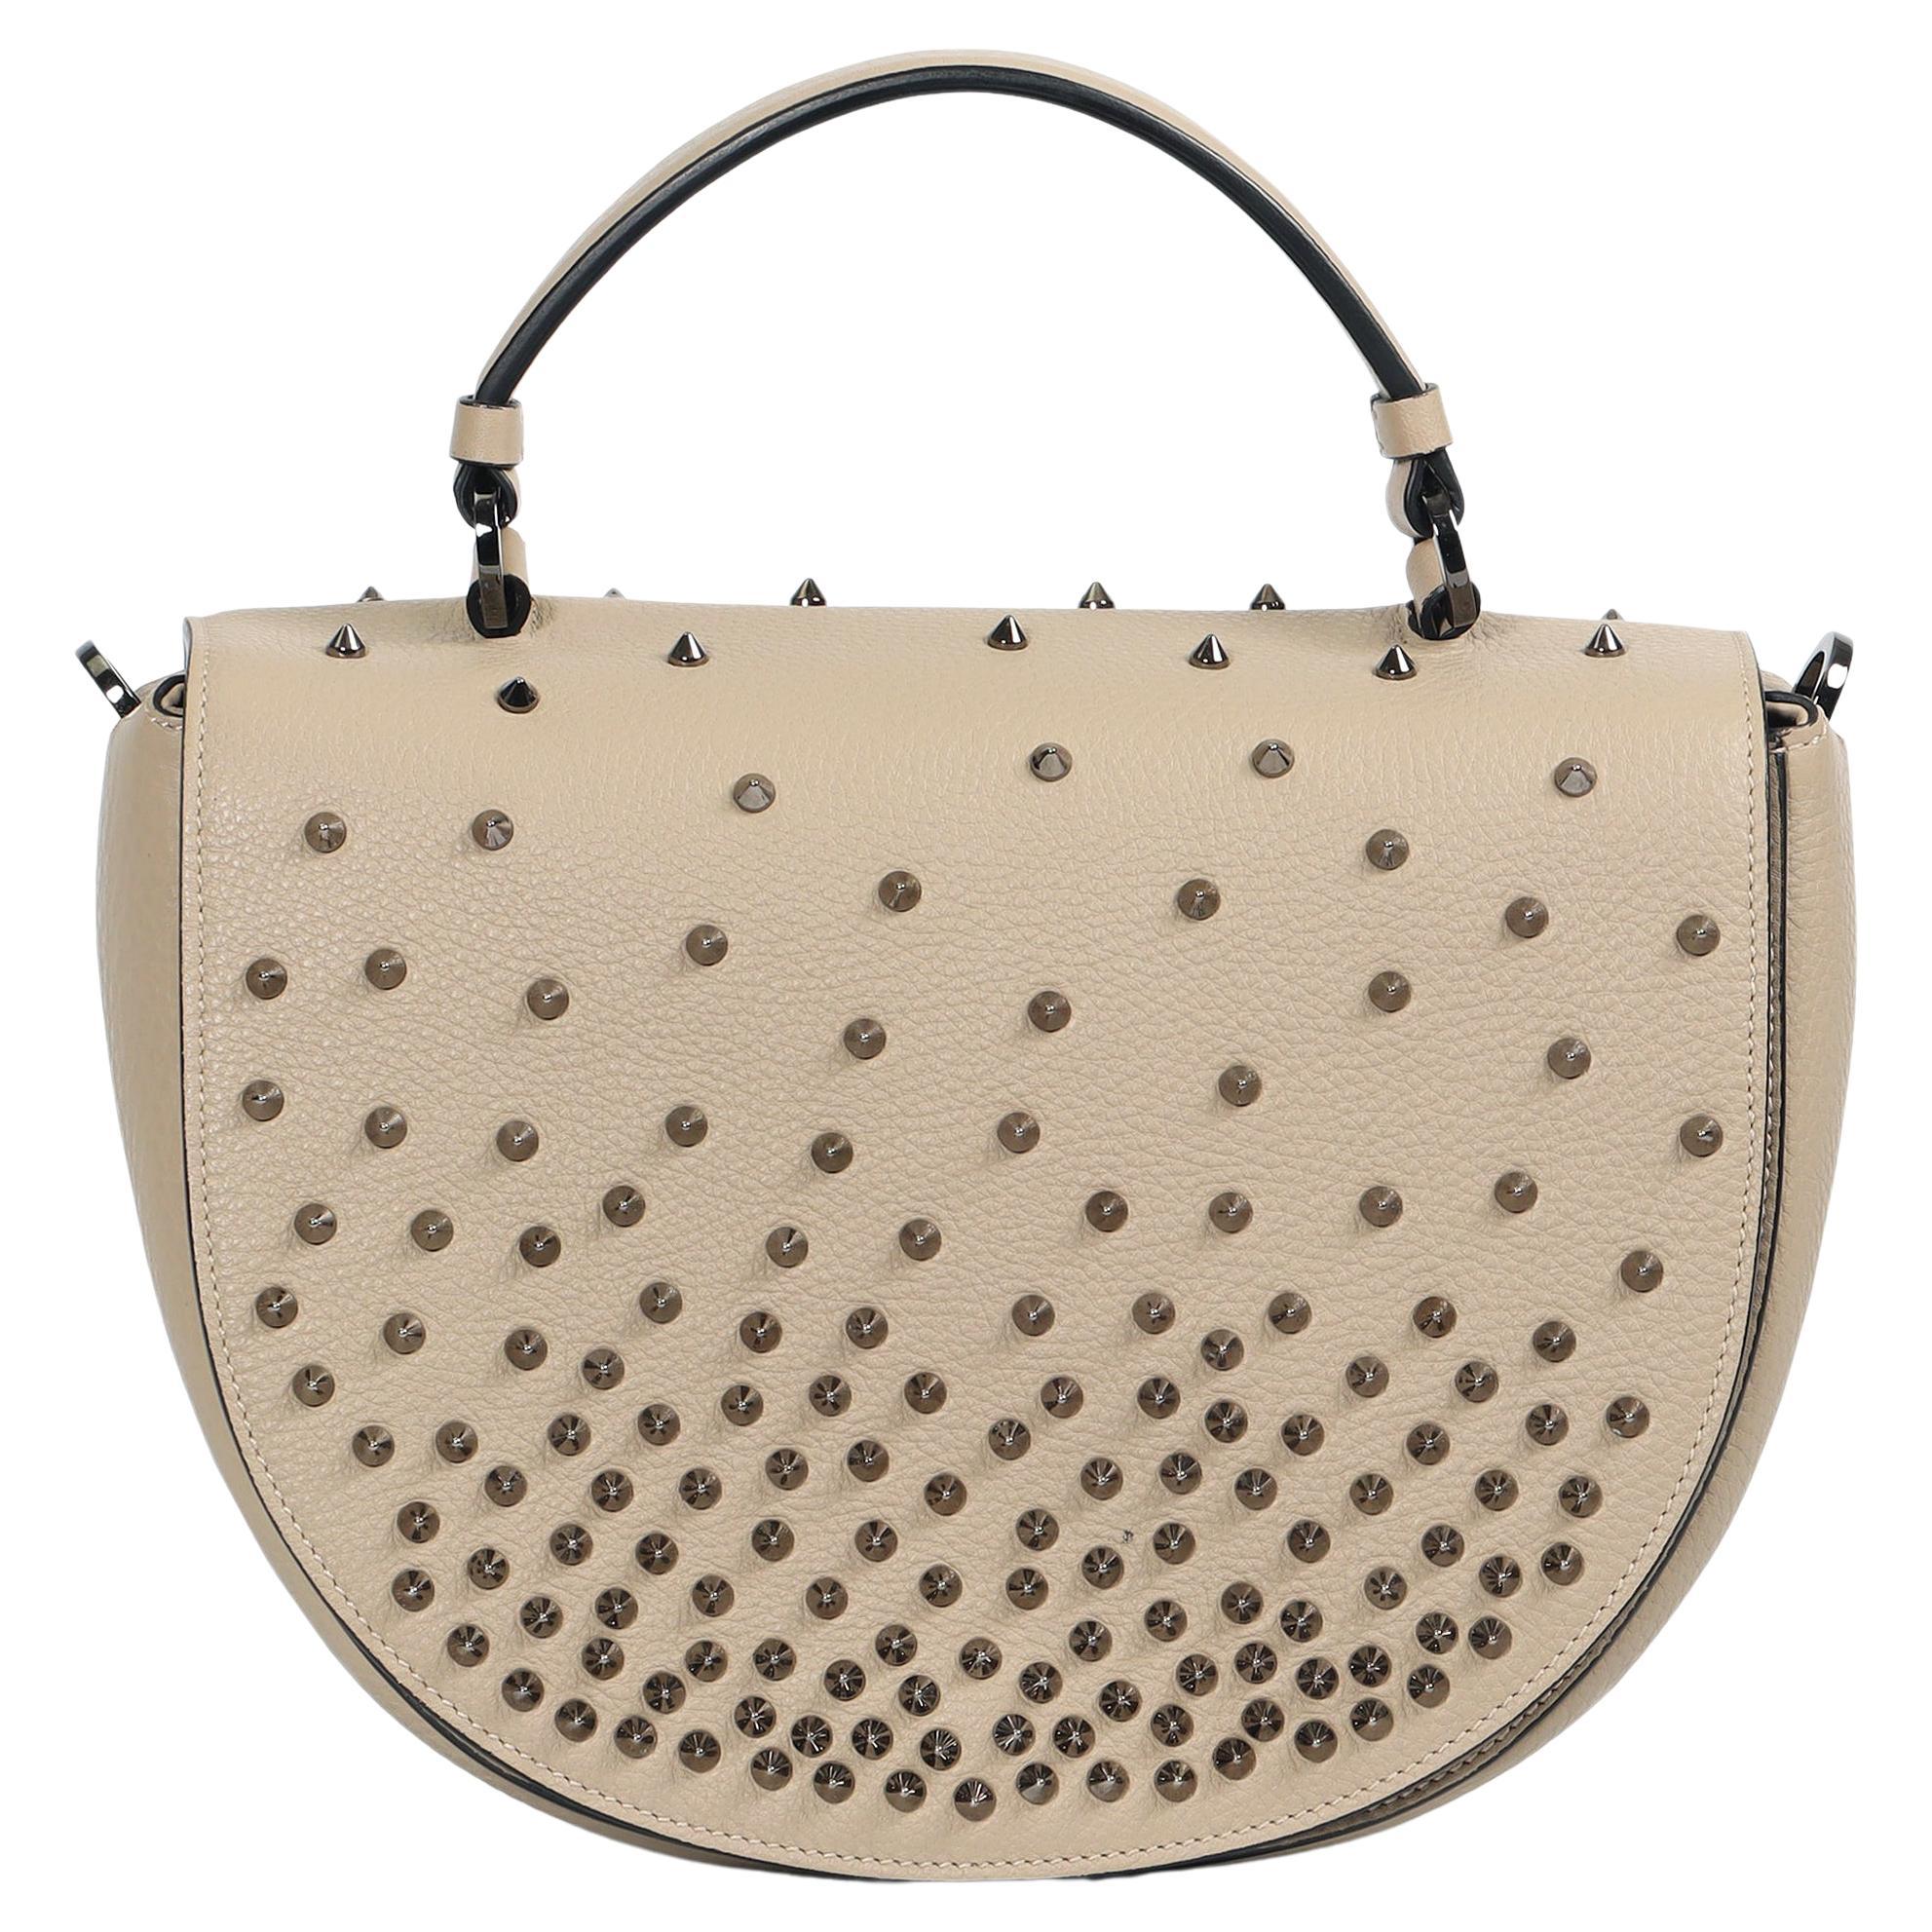 Christian Louboutin Panettone Spiked Leather Shoulder Bag For Sale